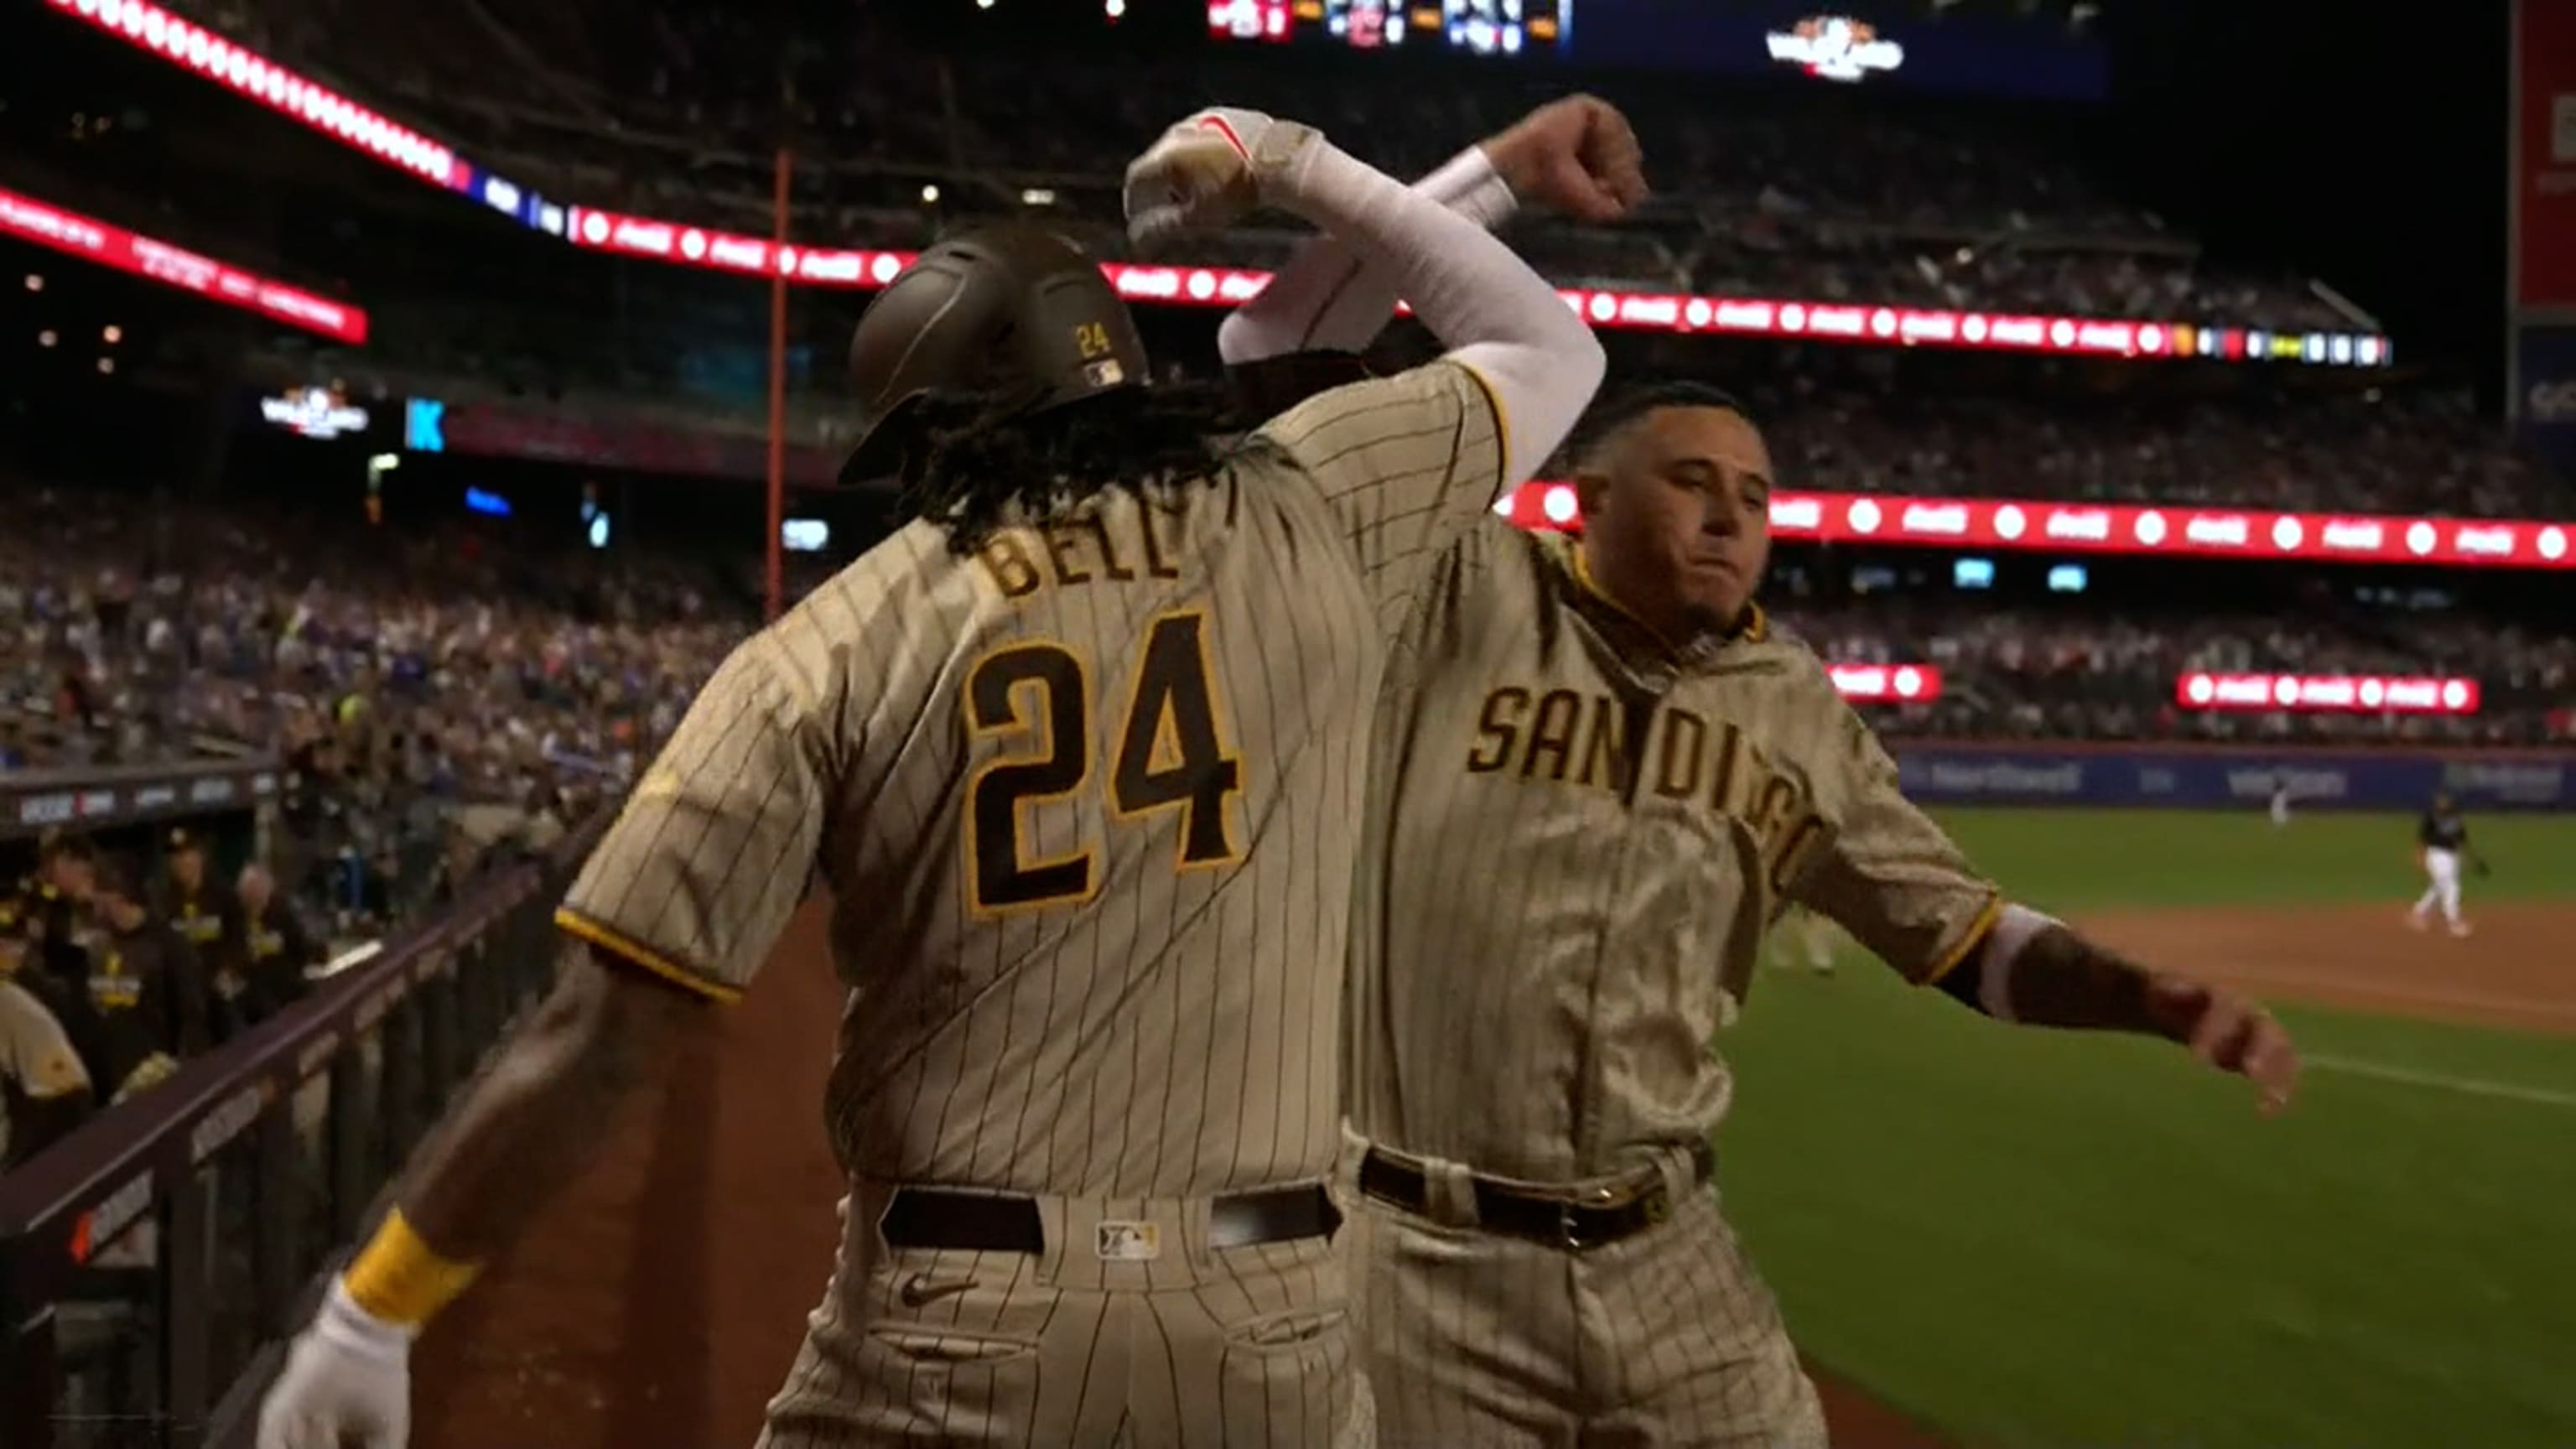 2022 MLB Wild Card Game 1 storylines